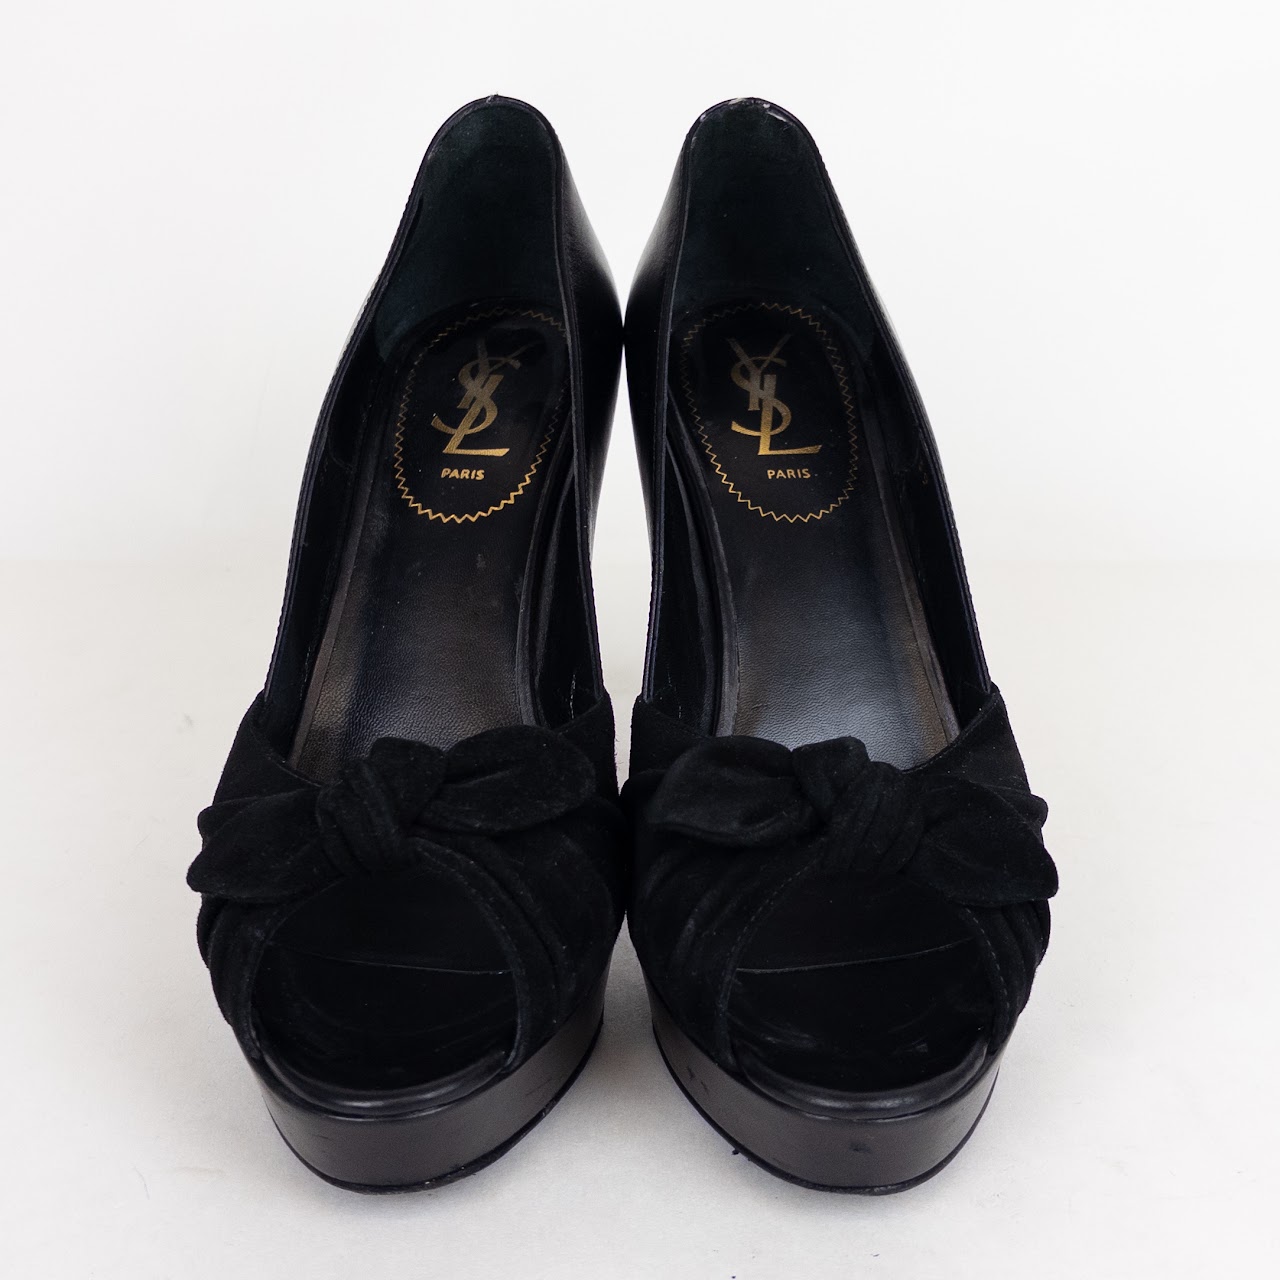 Yves Saint Laurent Suede and Leather Pumps